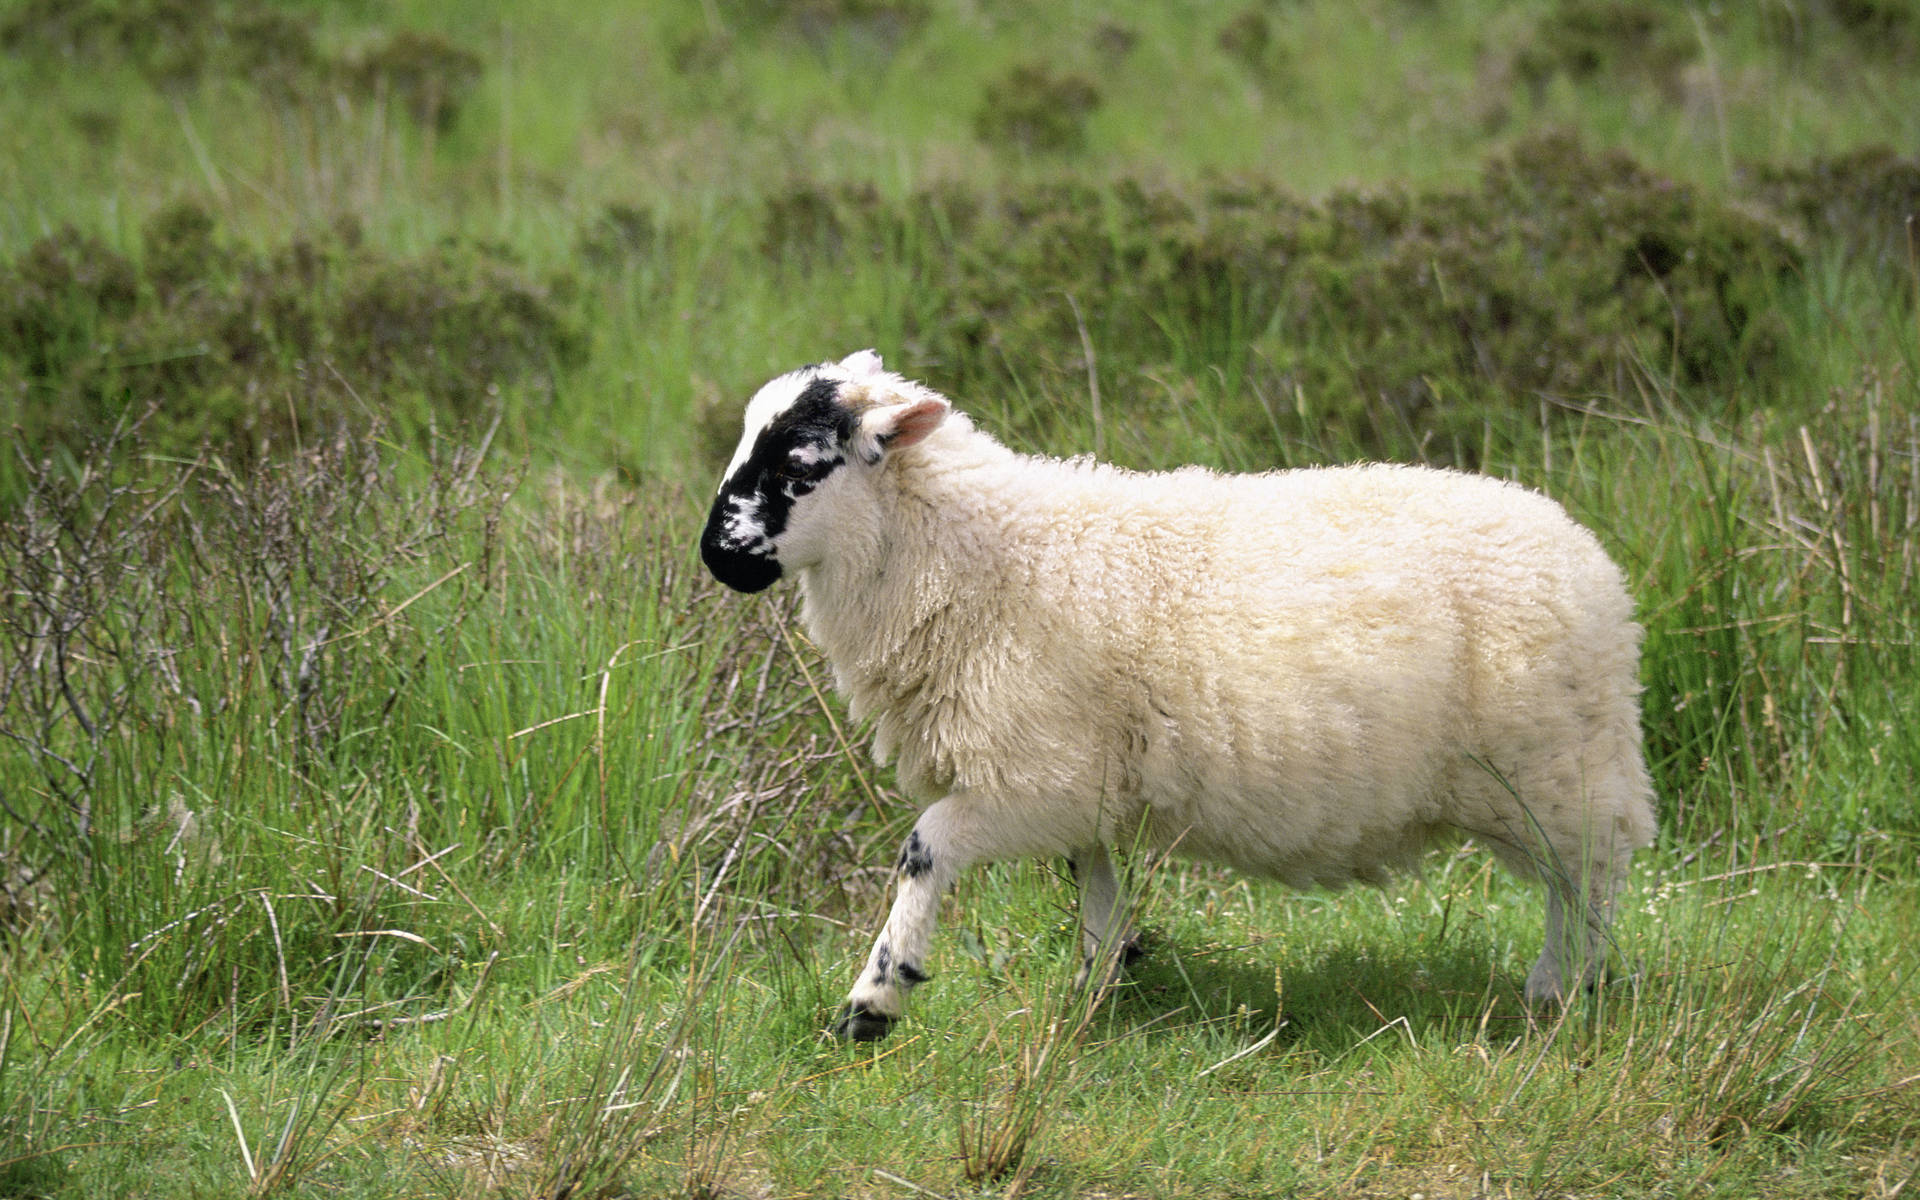 Cute Fluffy Sheep On Grass Background